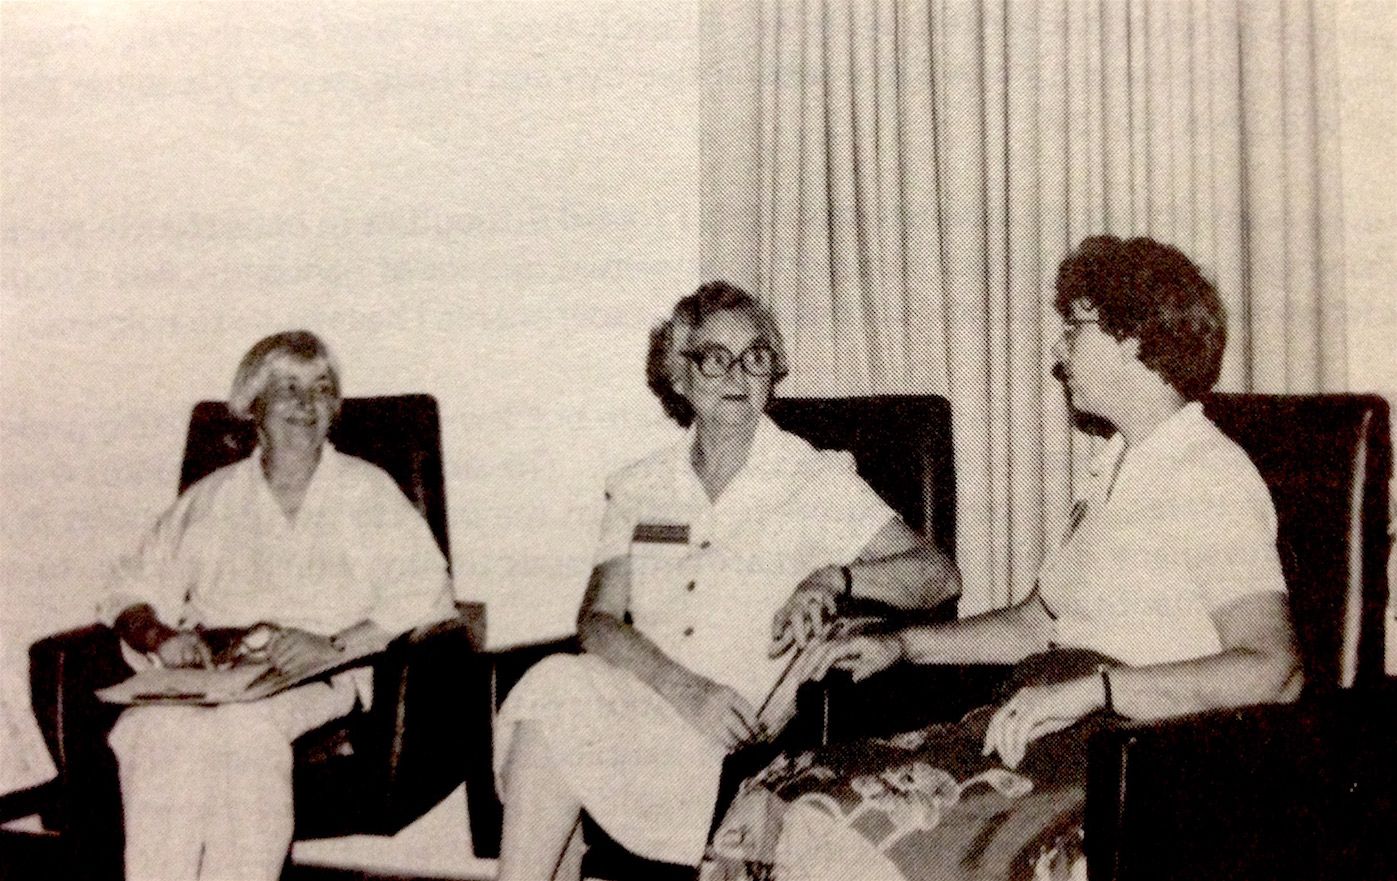 Photograph of Joan Bacon and two other women